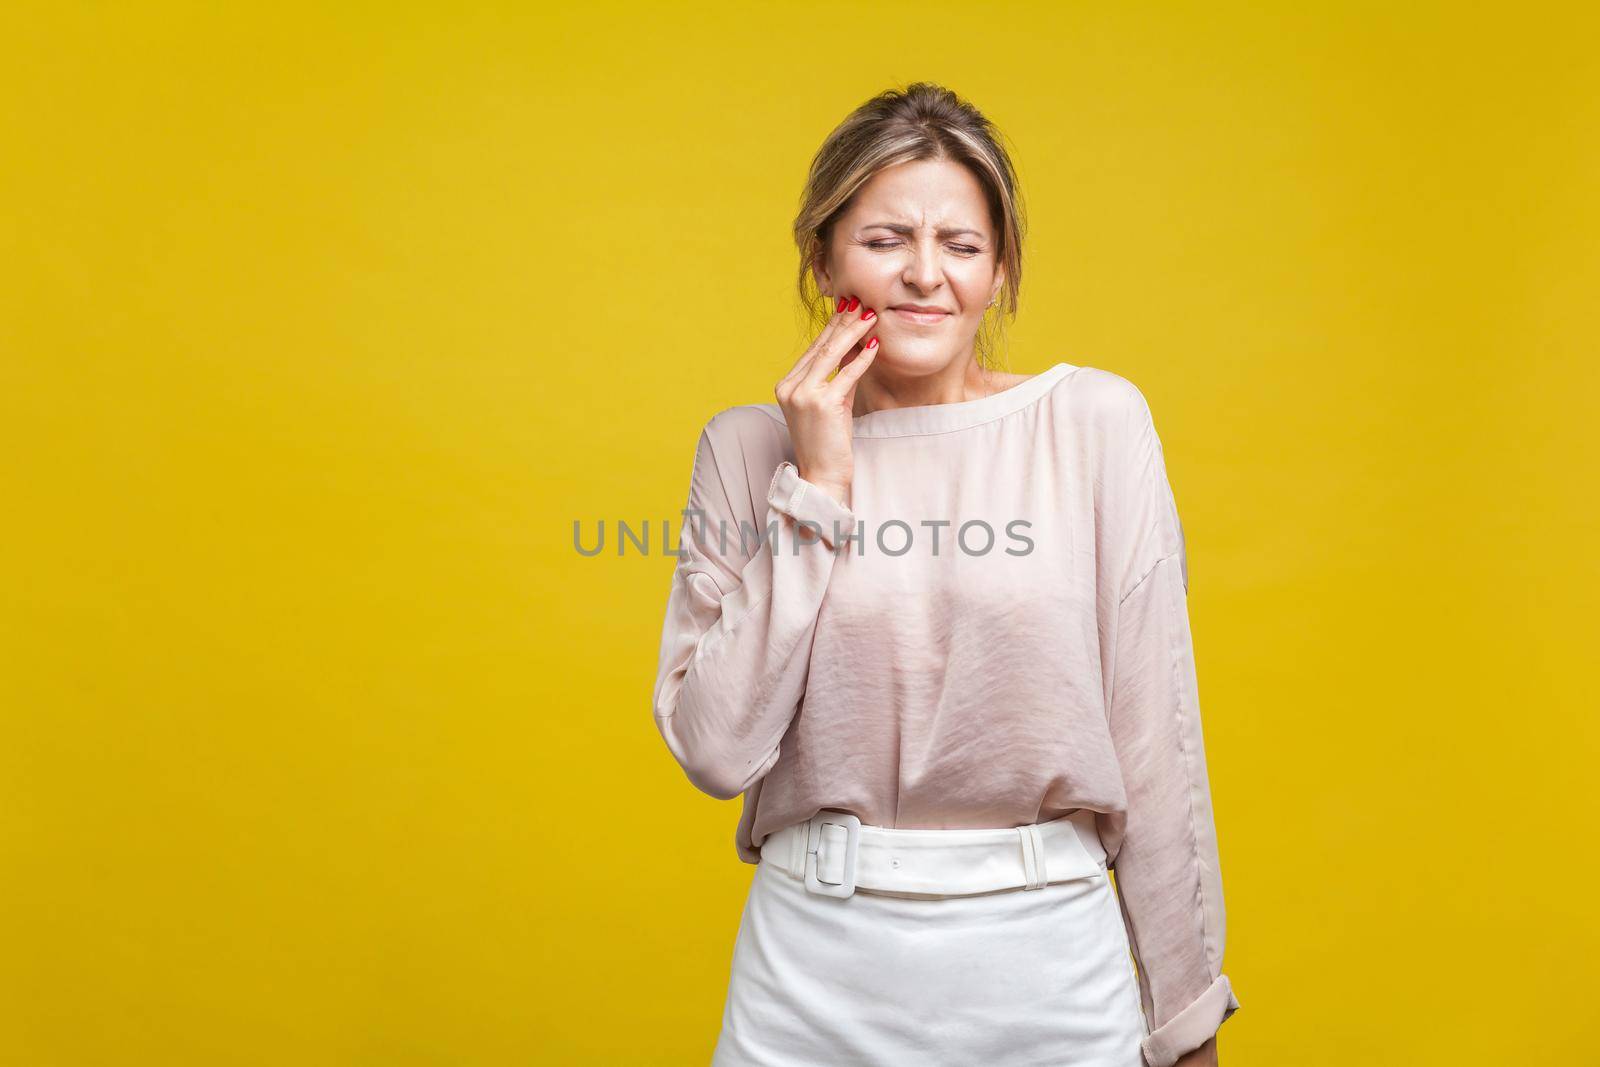 Portrait of upset sick young woman with fair hair in casual blouse standing with closed eyes, touching cheek suffering dental teeth ache, mouth injury. indoor studio shot isolated on yellow background